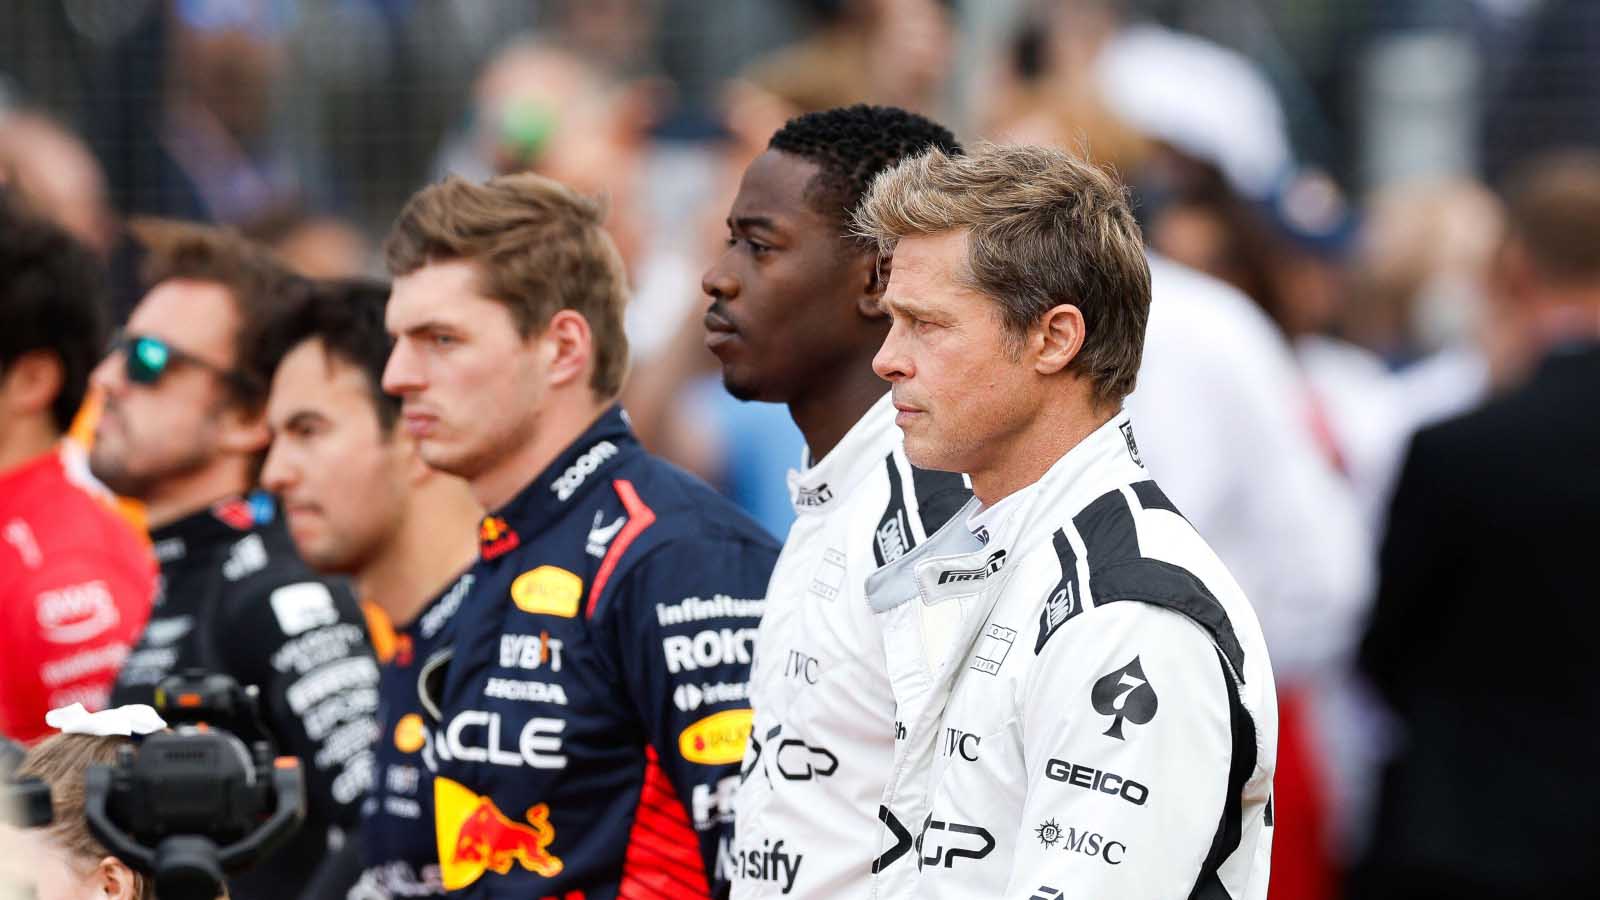 Revealed Brad Pitt gives key details of F1 movie storyline after